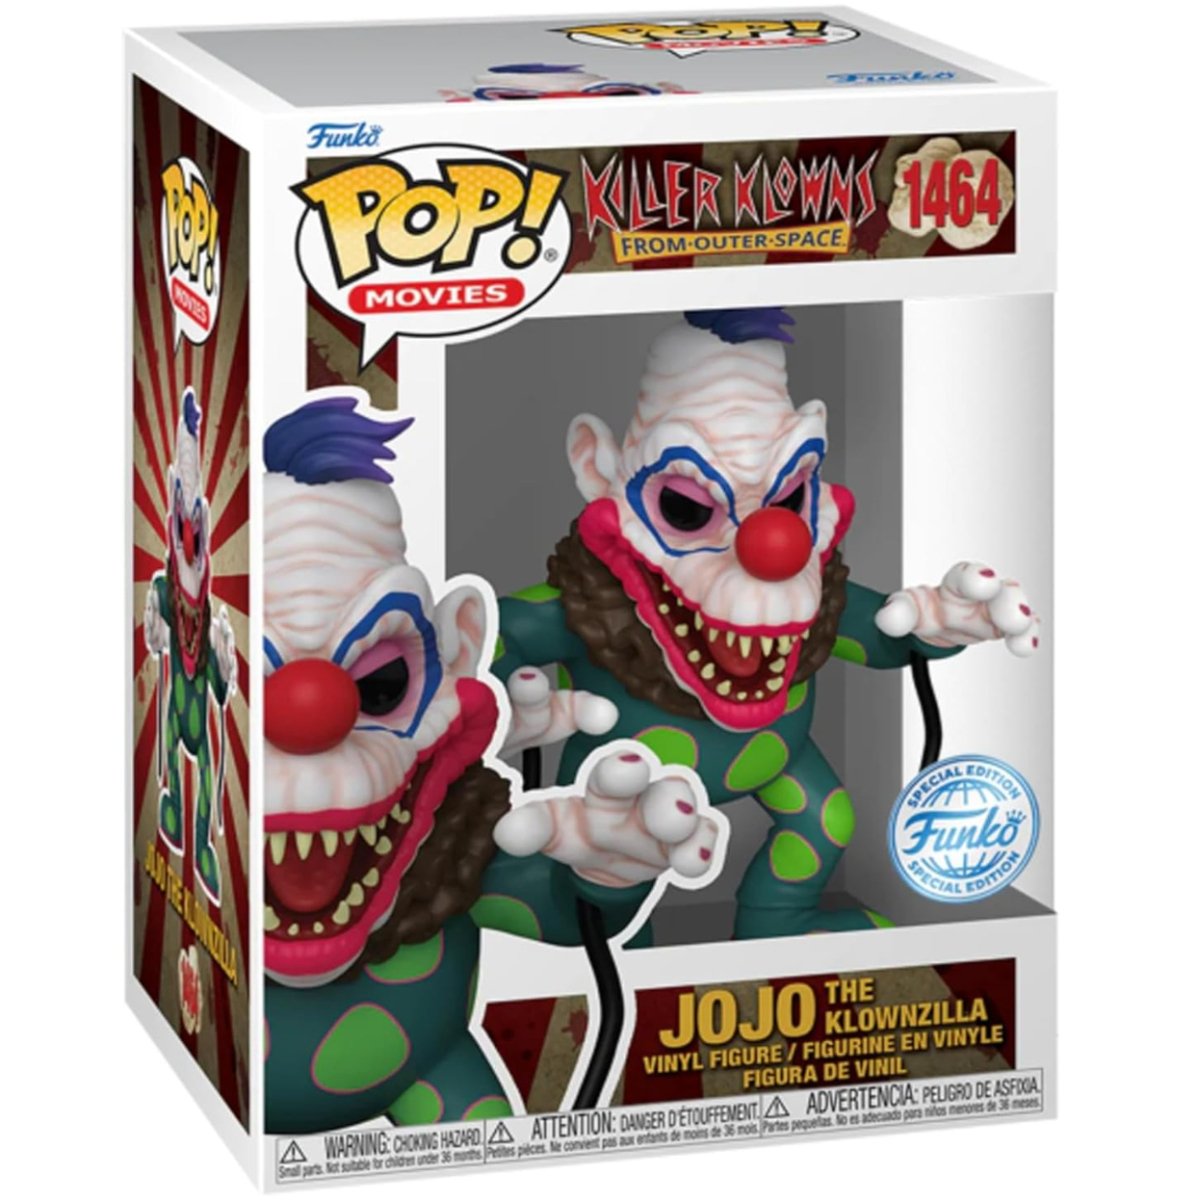 Killer Klowns from Outer Space - JoJo The Klownzilla (Special Edition) #1464 - Funko Pop! Vinyl Movies - Persona Toys